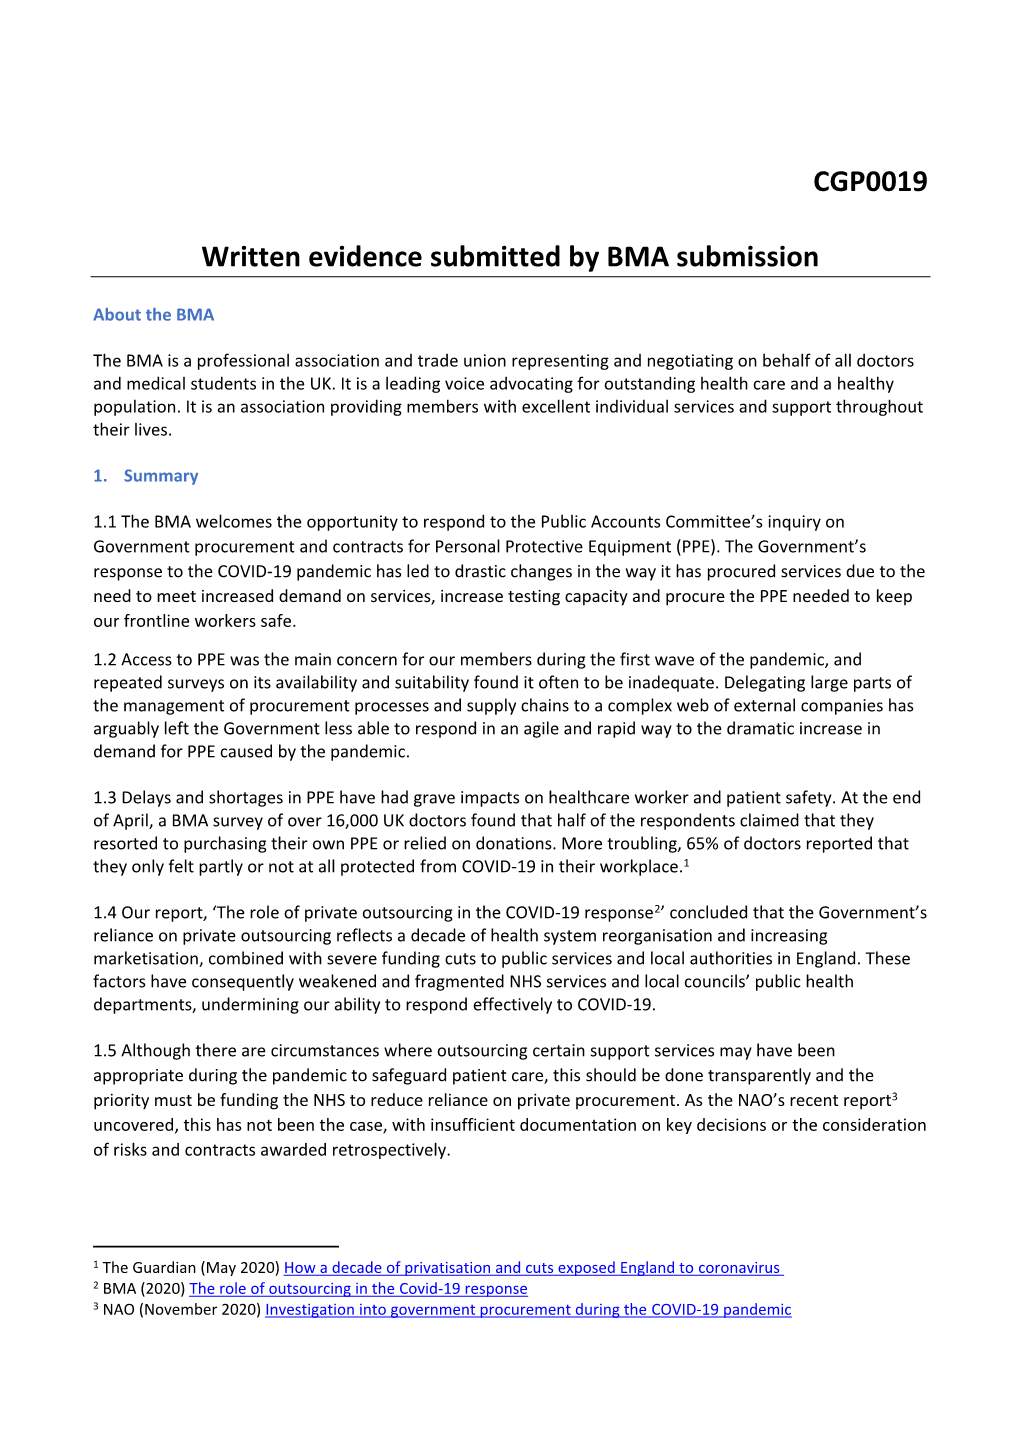 CGP0019 Written Evidence Submitted by BMA Submission